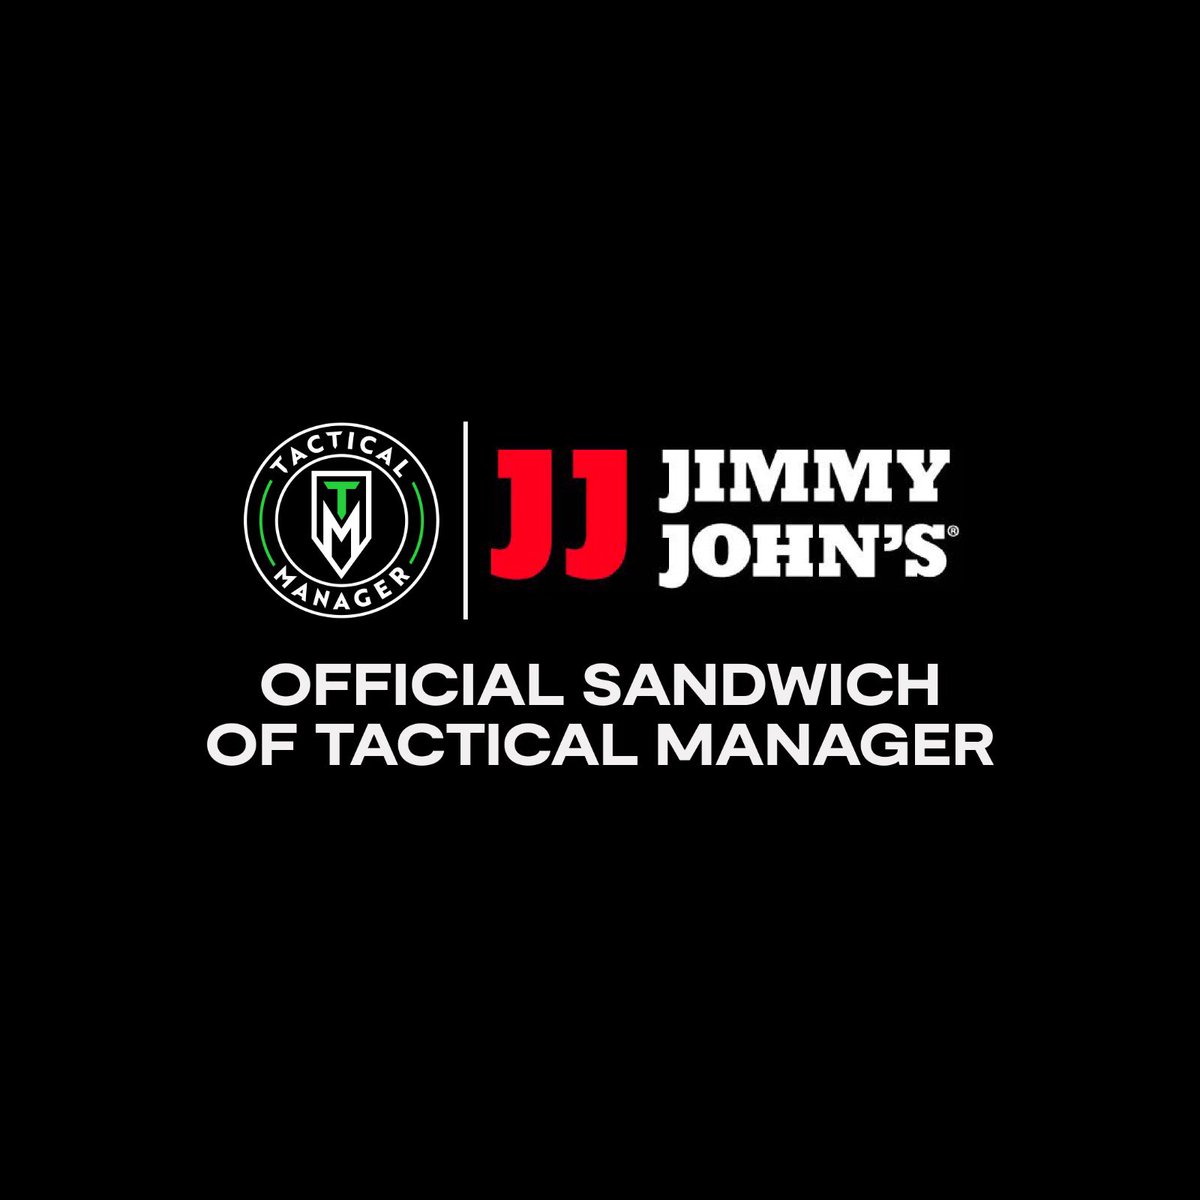 We are proud to announce that Tactical Manager TV will be partnering up with @jimmyjohns for the 2022 World Cup! We will bringing lots of promotions to our viewers along with plenty of surprises or not, it depends on how y’all behave. Stay tuned but not hungry!!